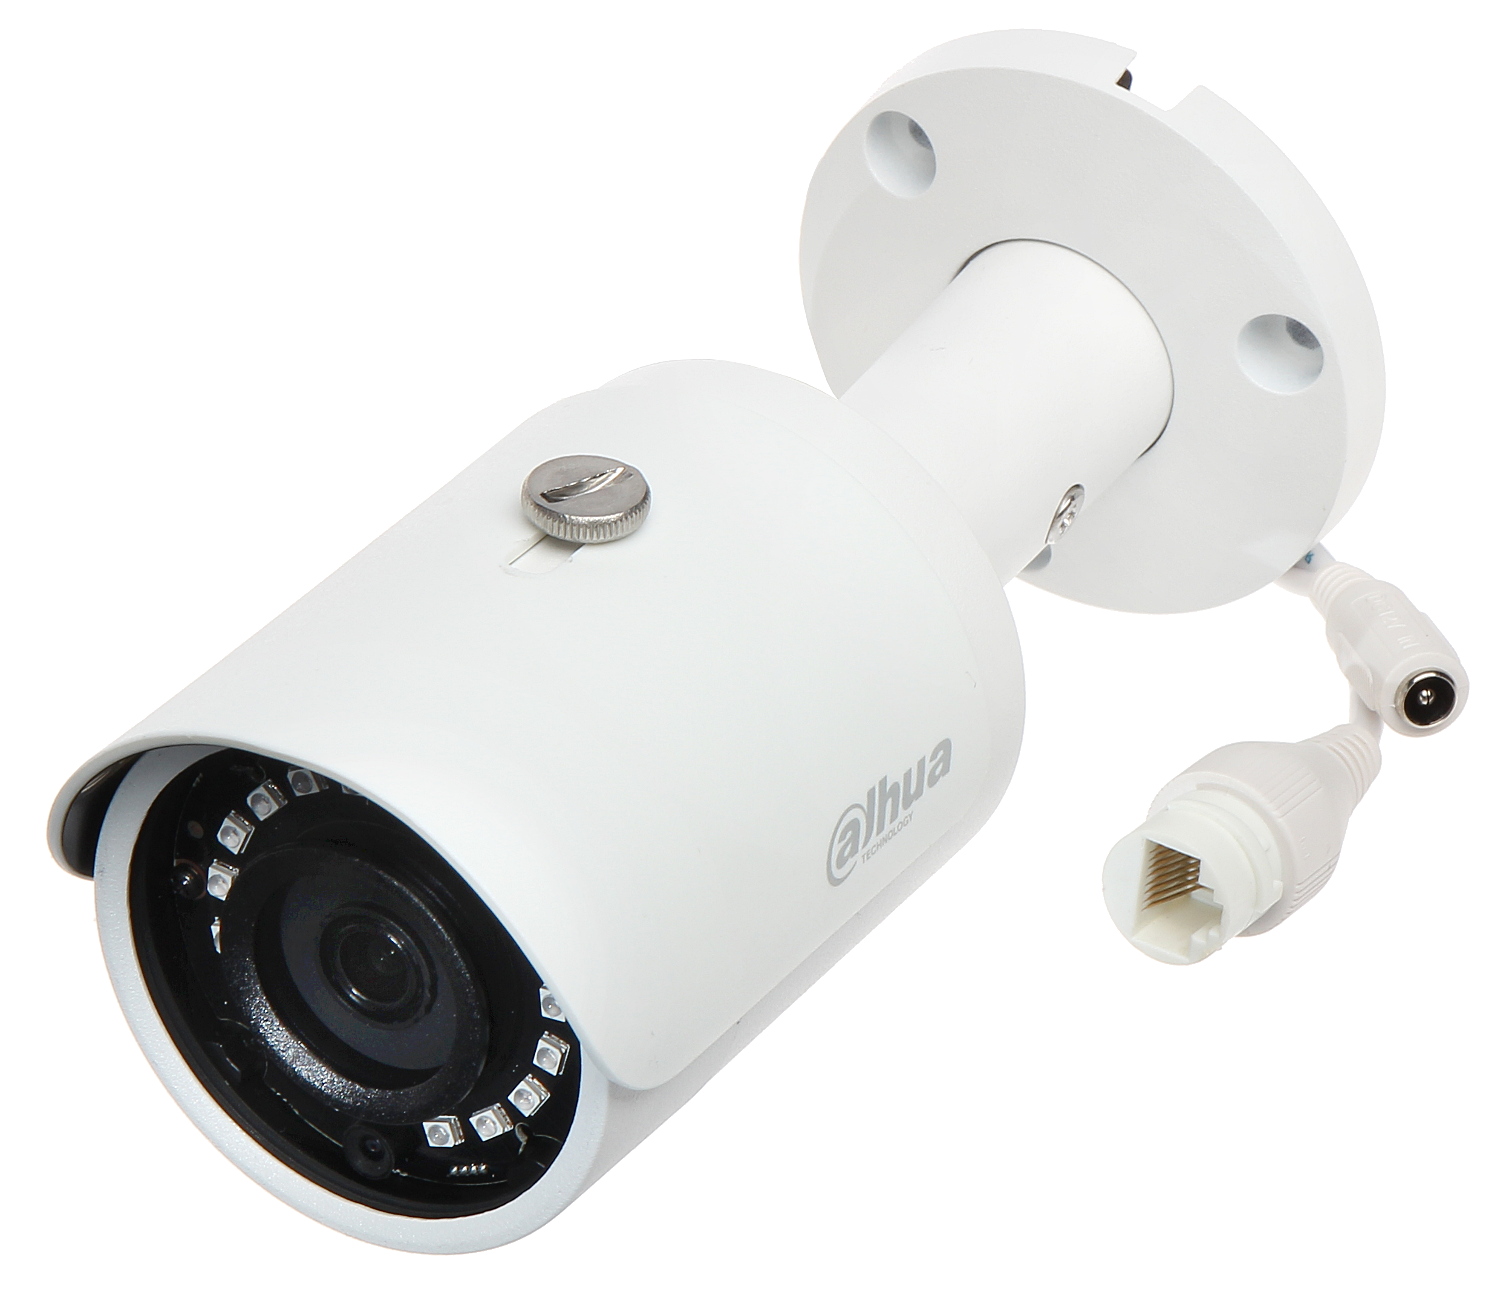 IP CAMERA DH-IPC-HFW1431SP-028 4.0 Mpx 2.8 mm DAHUA - IP Cameras with  Fixed-Focal Lens and Ifra-Red Illumina... - Delta